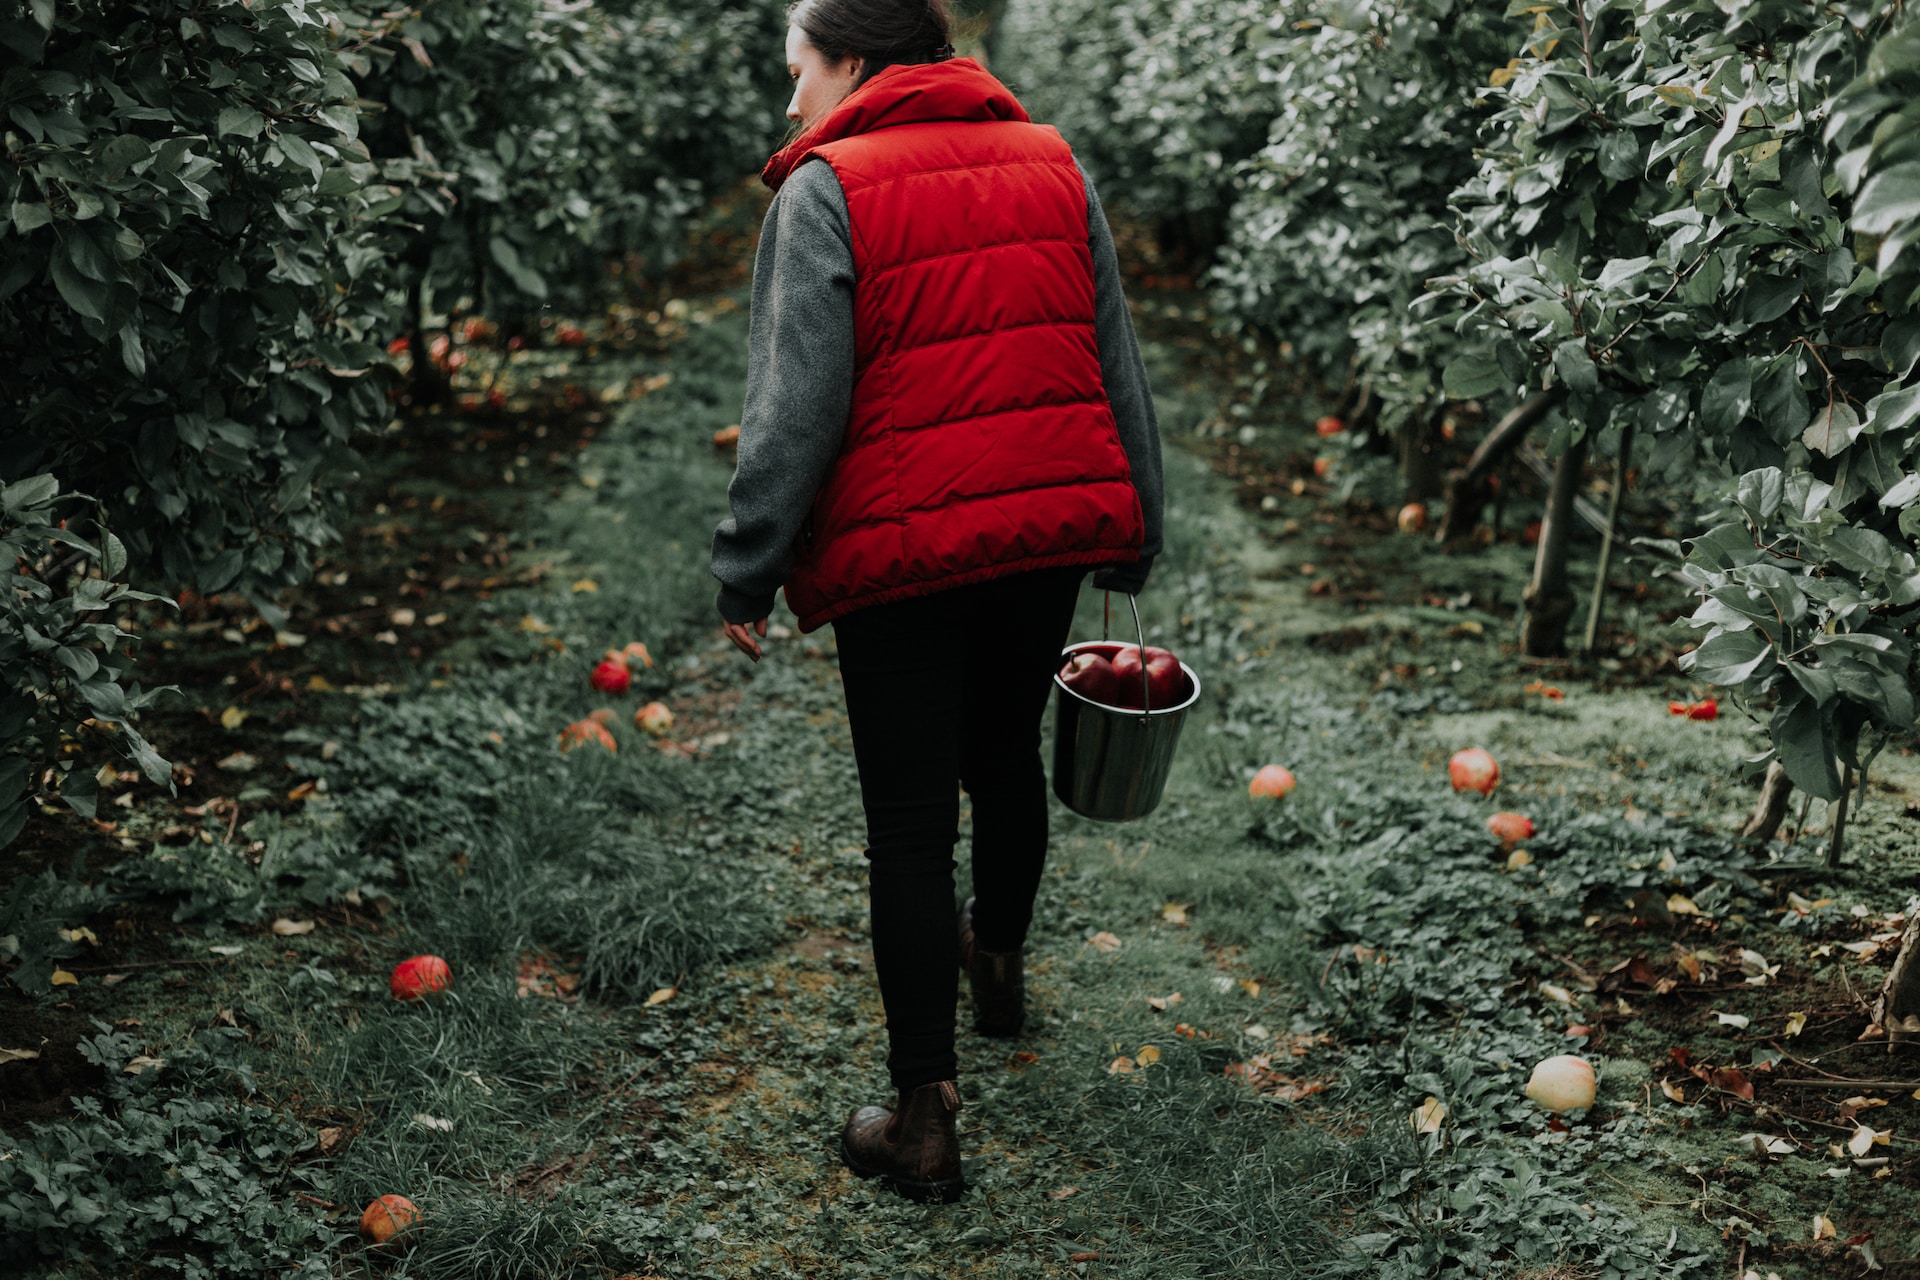 Woman carrying bucket of apples in orchard